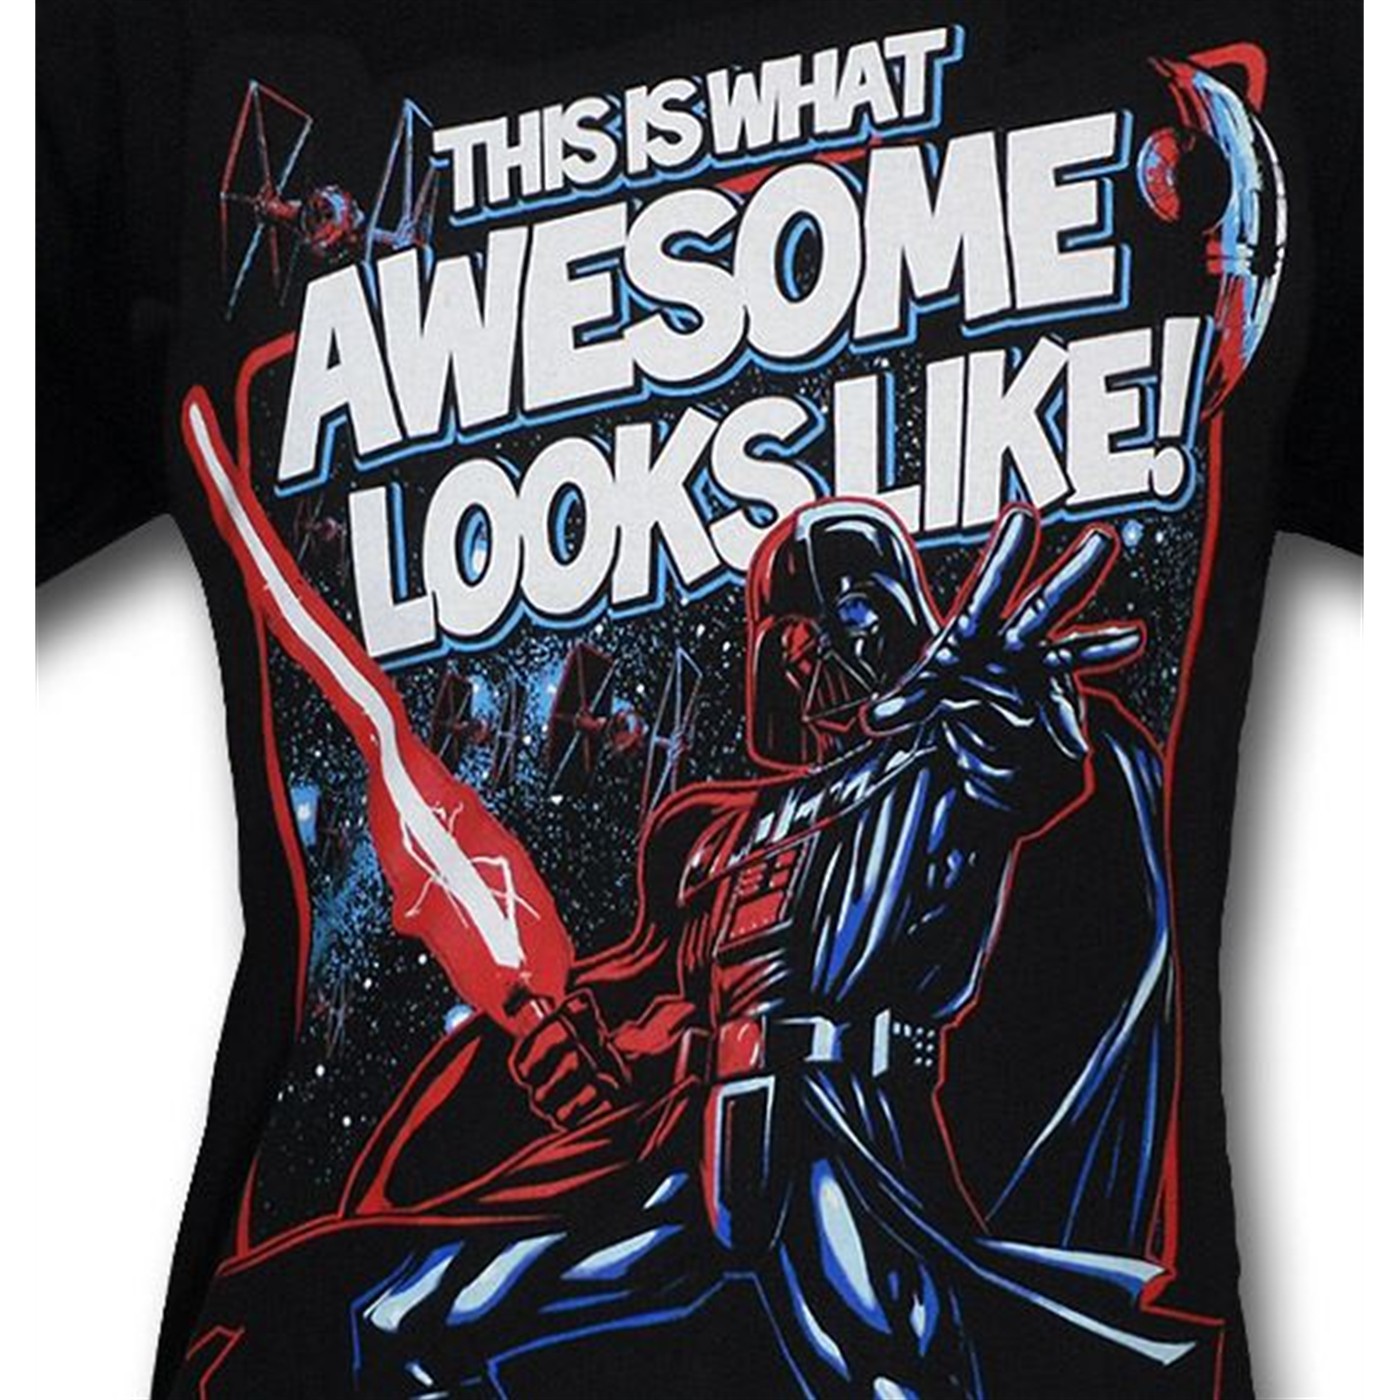 Darth Vader is AWESOME Kid's T-Shirt